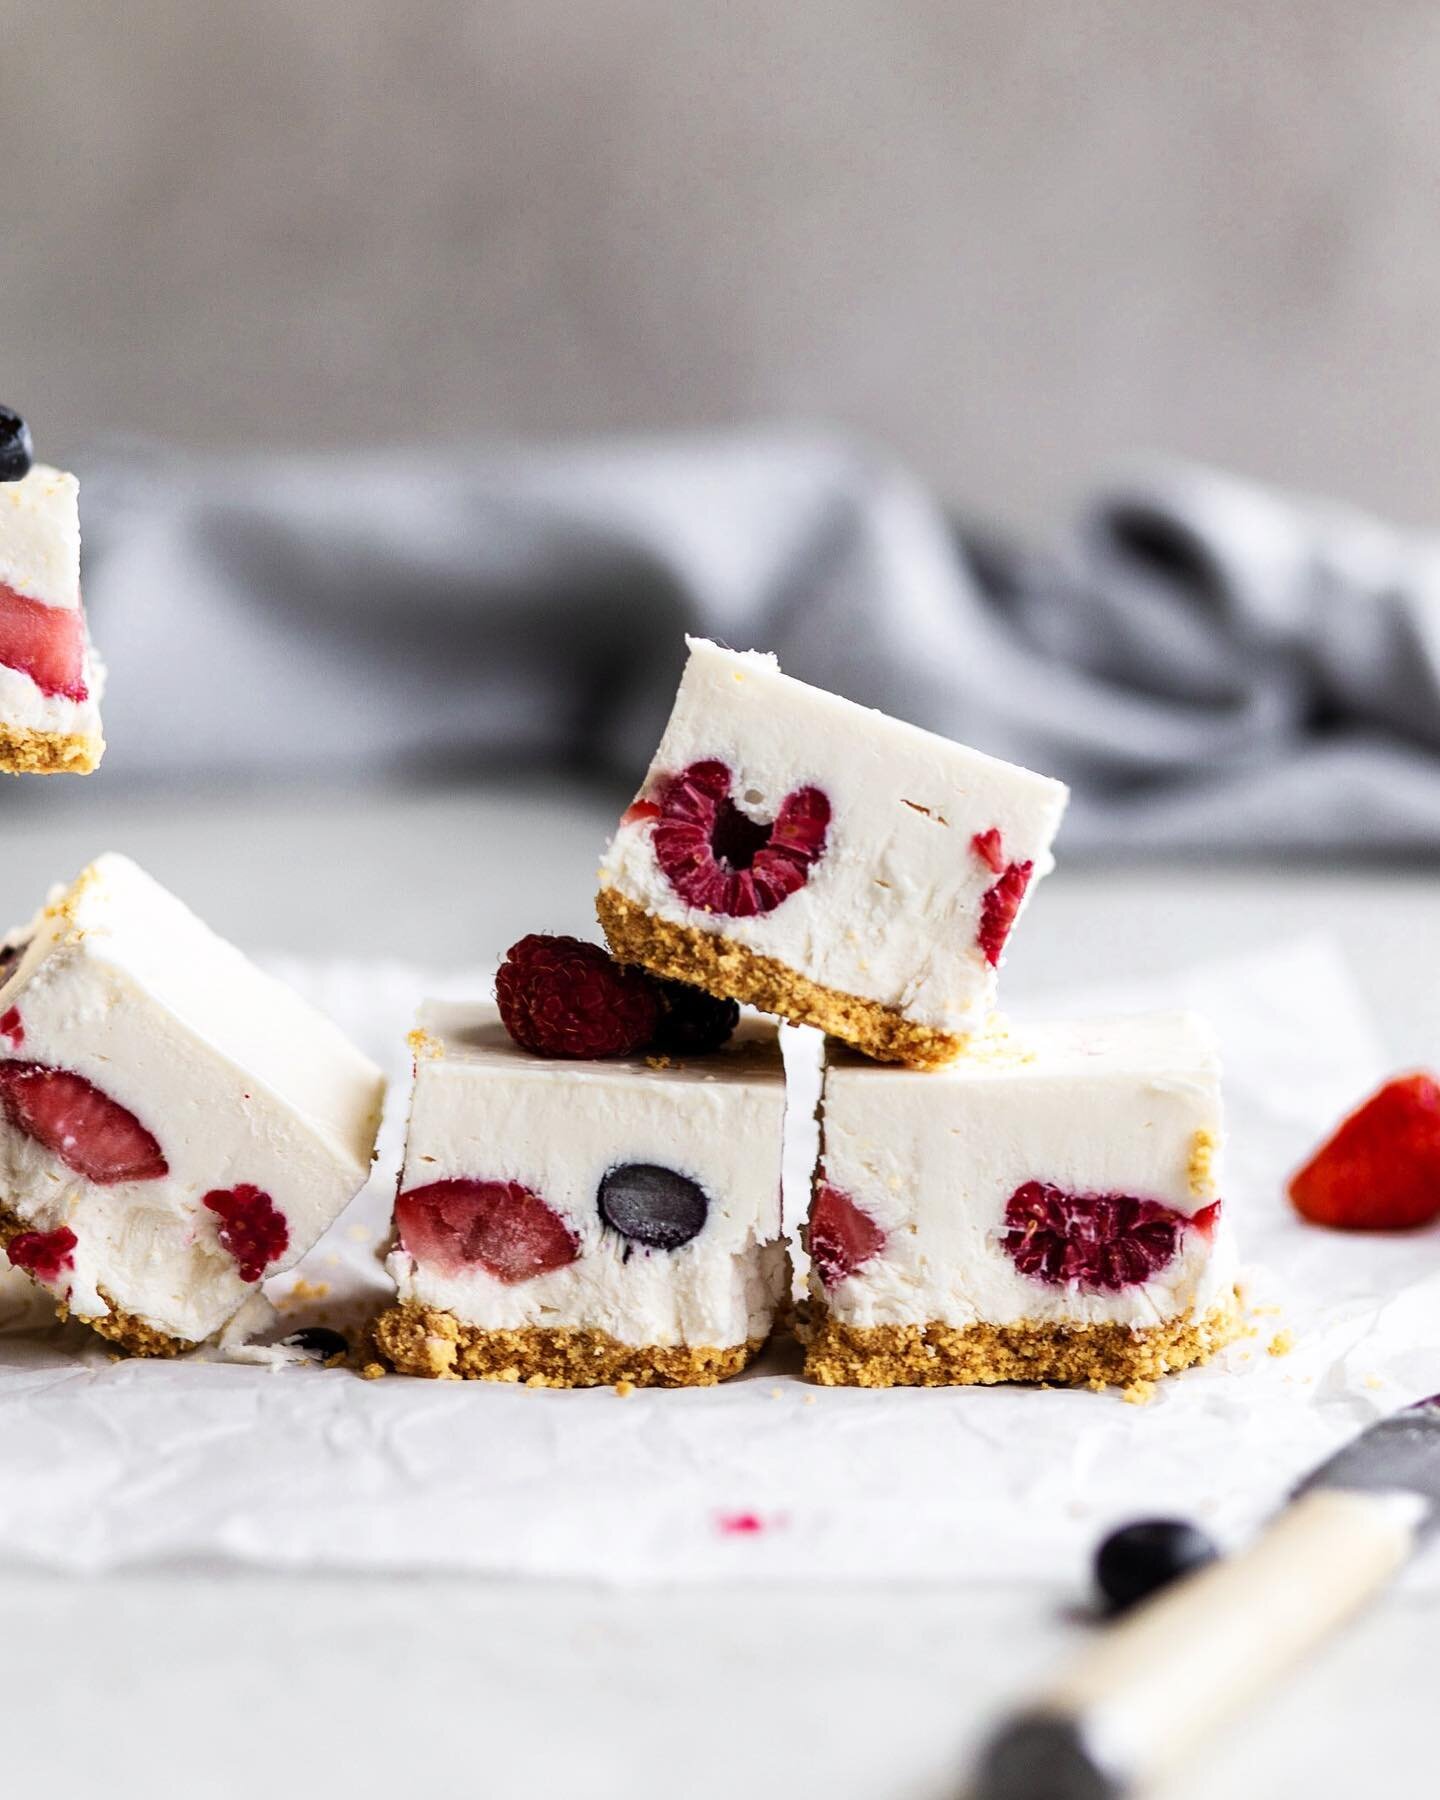 Who is here for no bake desserts?

These no bake mixed berry cheesecake bars are super refreshing and easy to make- plus it&rsquo;s sooo fun when you cut into them and you see the berries peaking out at you!

Really loved the crispness of these shots